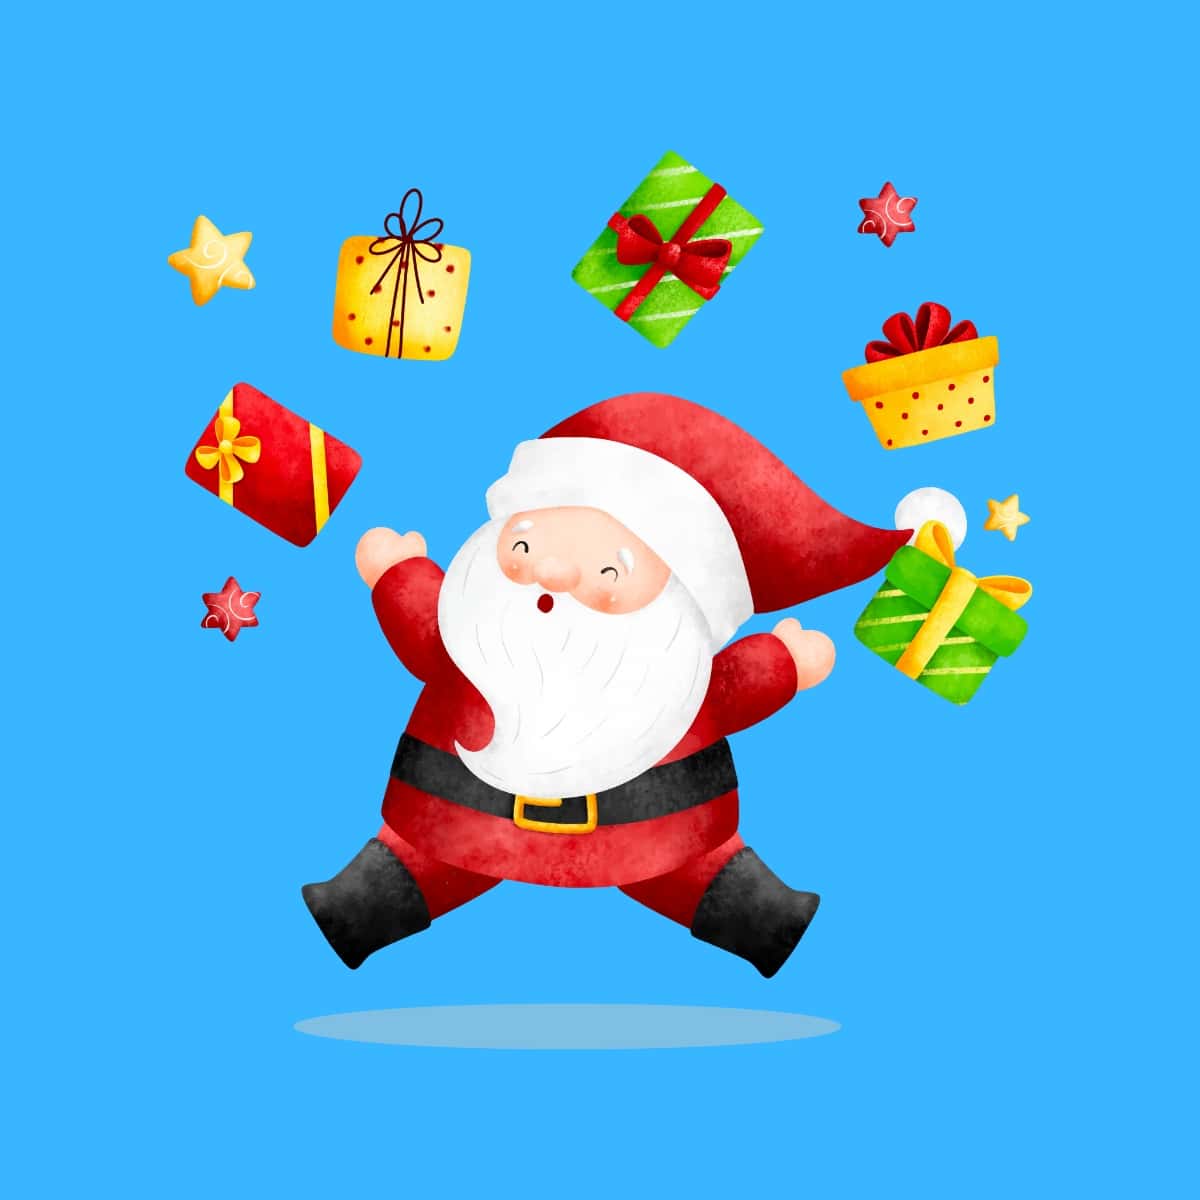 Cartoon graphic of Santa jumping with Christmas presents floating over him on a blue background.